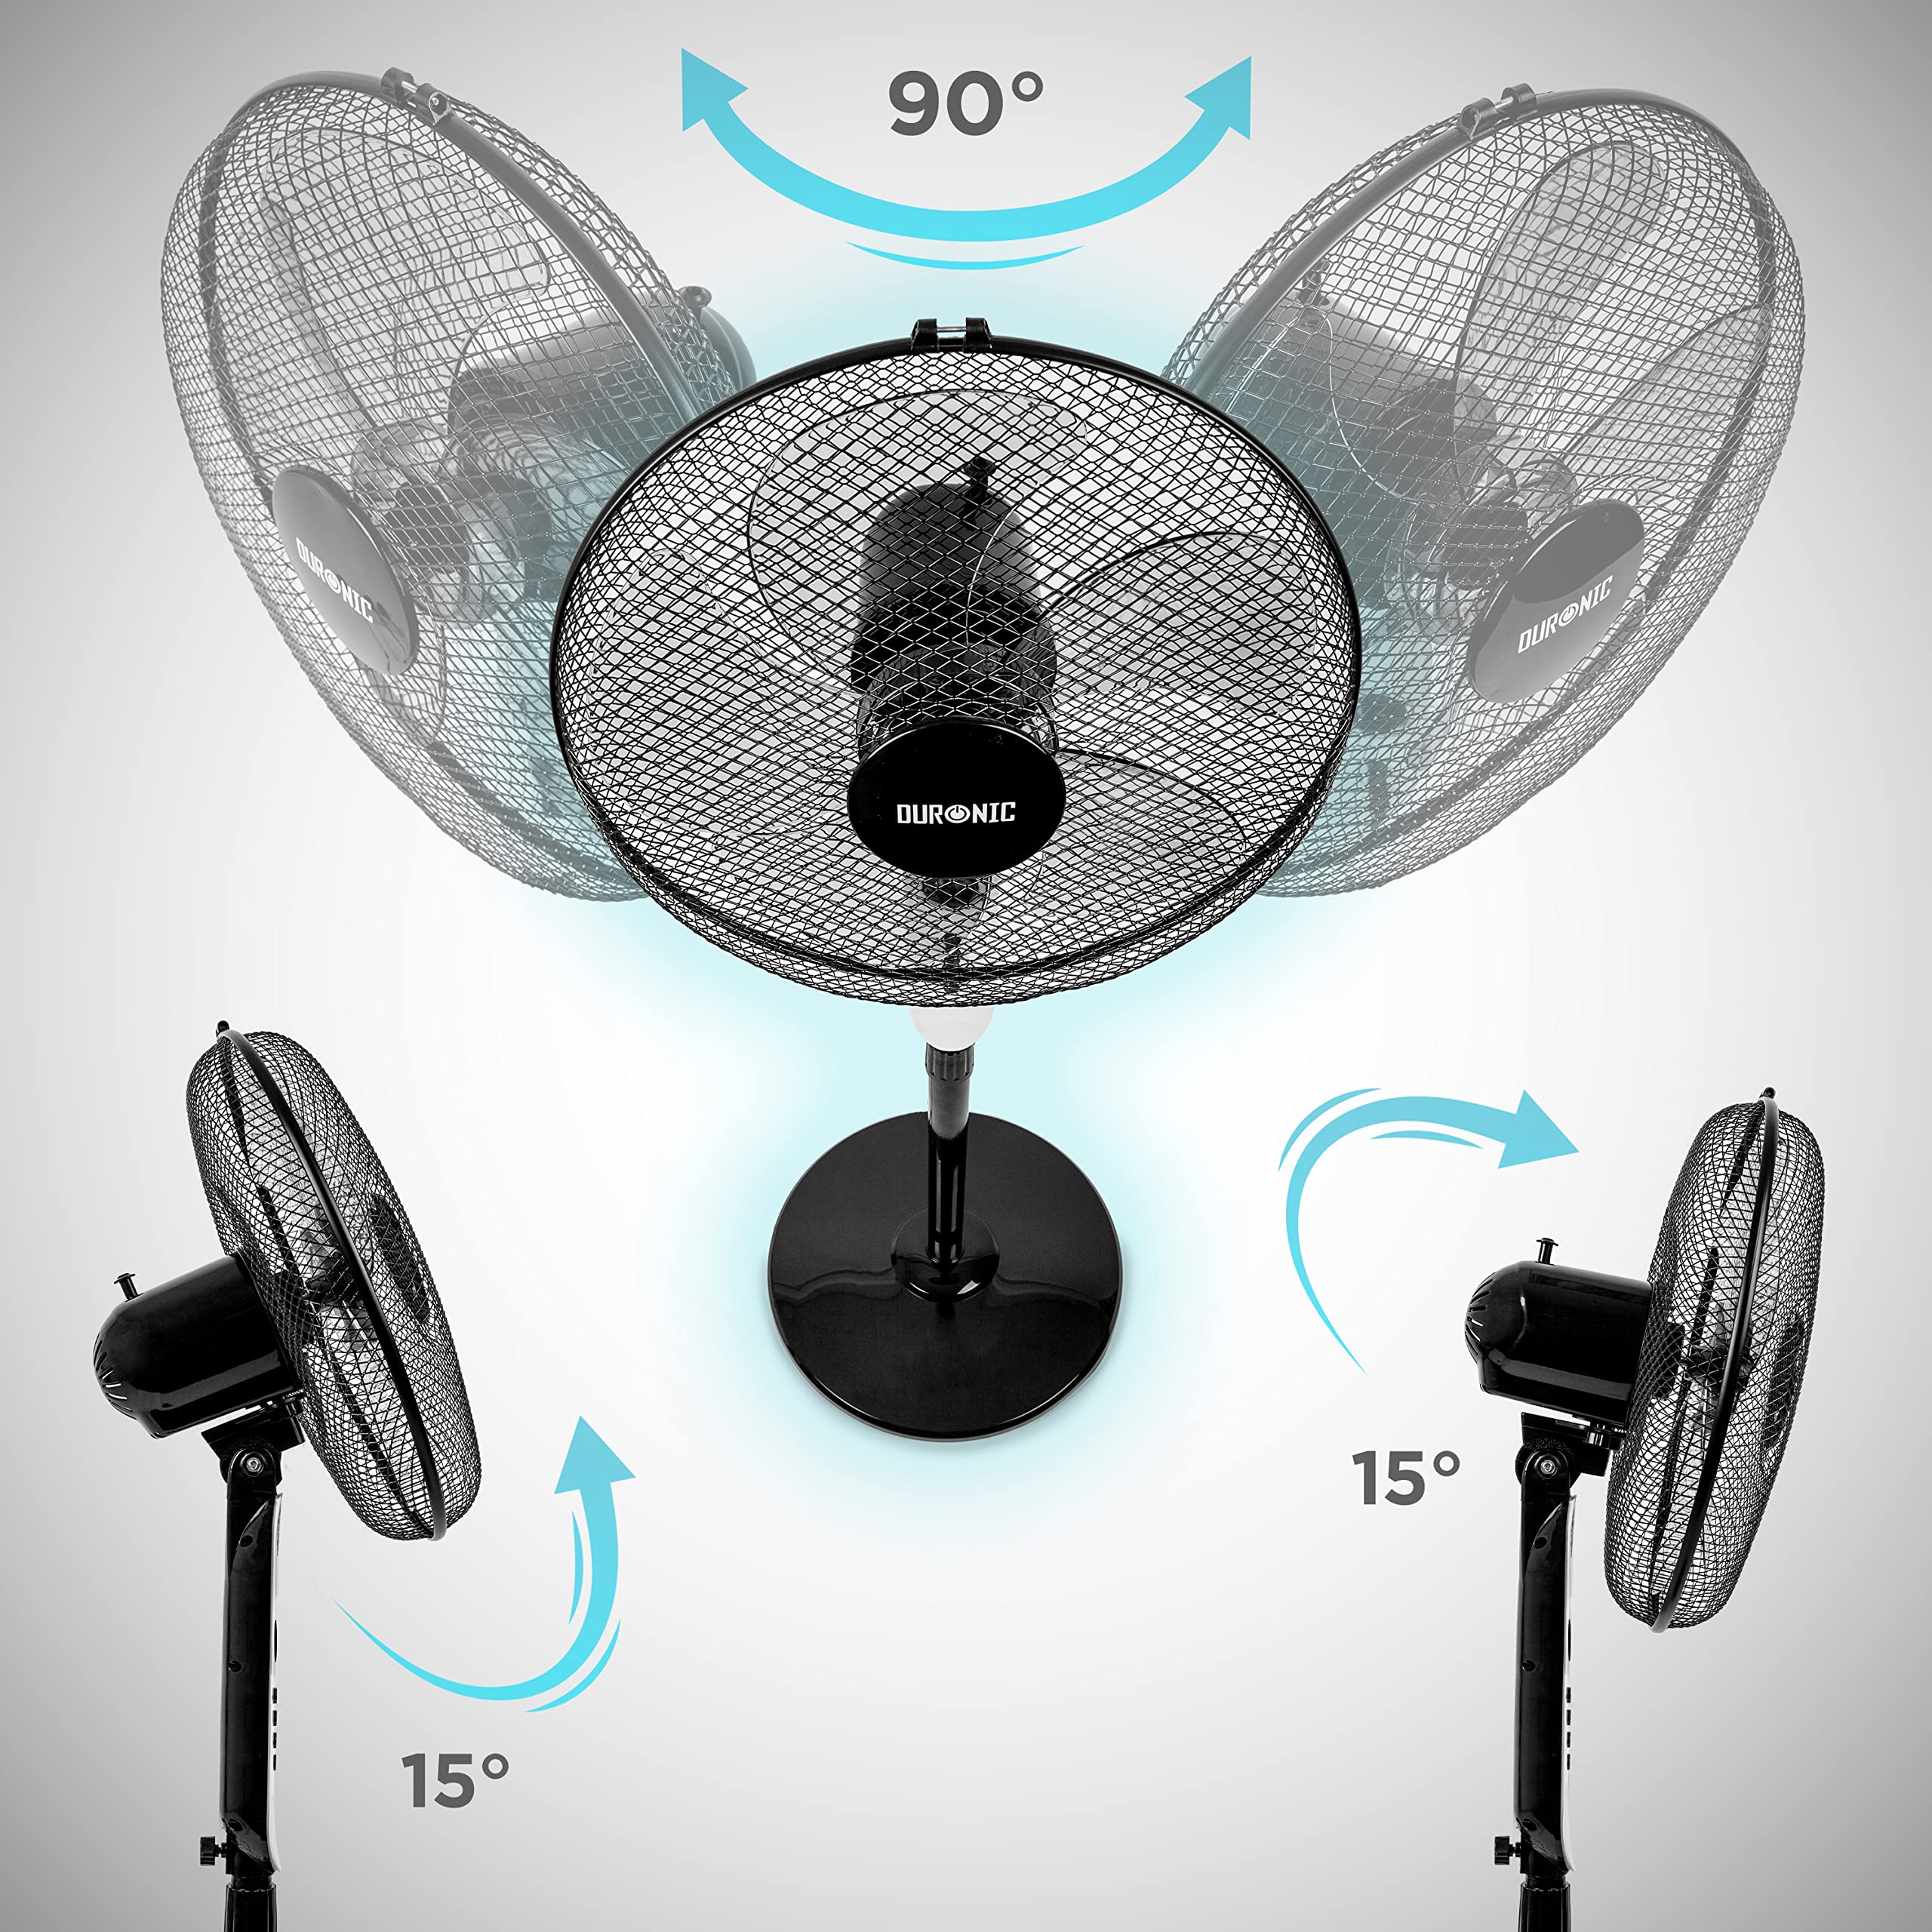 Duronic Pedestal Fan FN65, Stand Up Remote Control Fan, Floor Standing Cooling 16 Inch Fan, 5 Blade Oscillating Air Cooler for Summer, 3 Speed, Timer